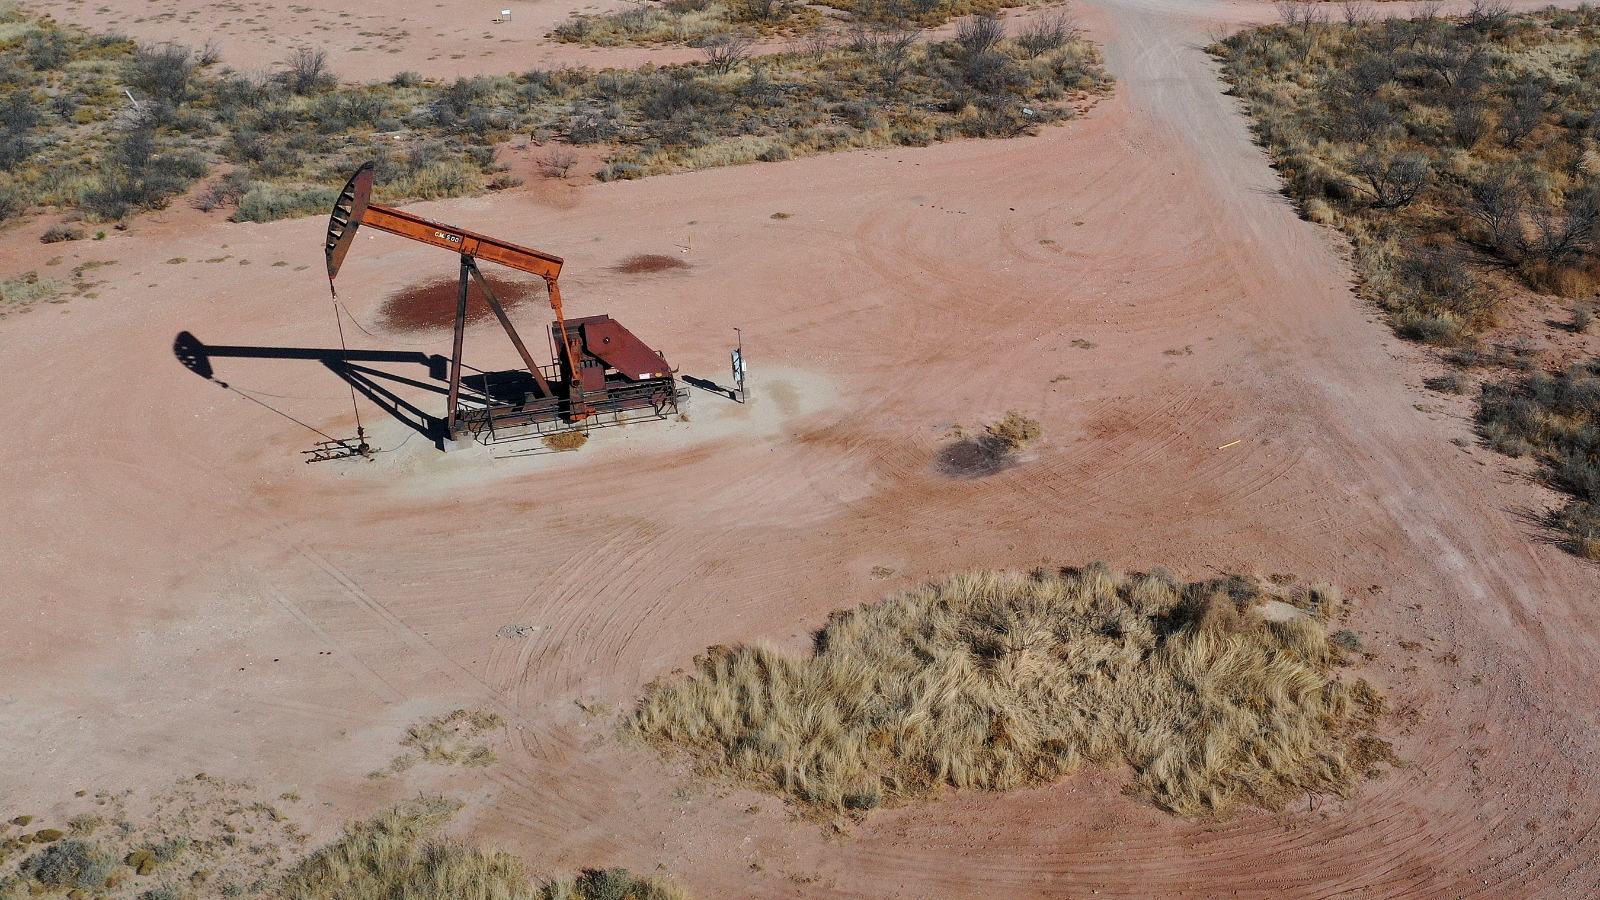 Drilling for oil on public land in the US is about to get more expensive